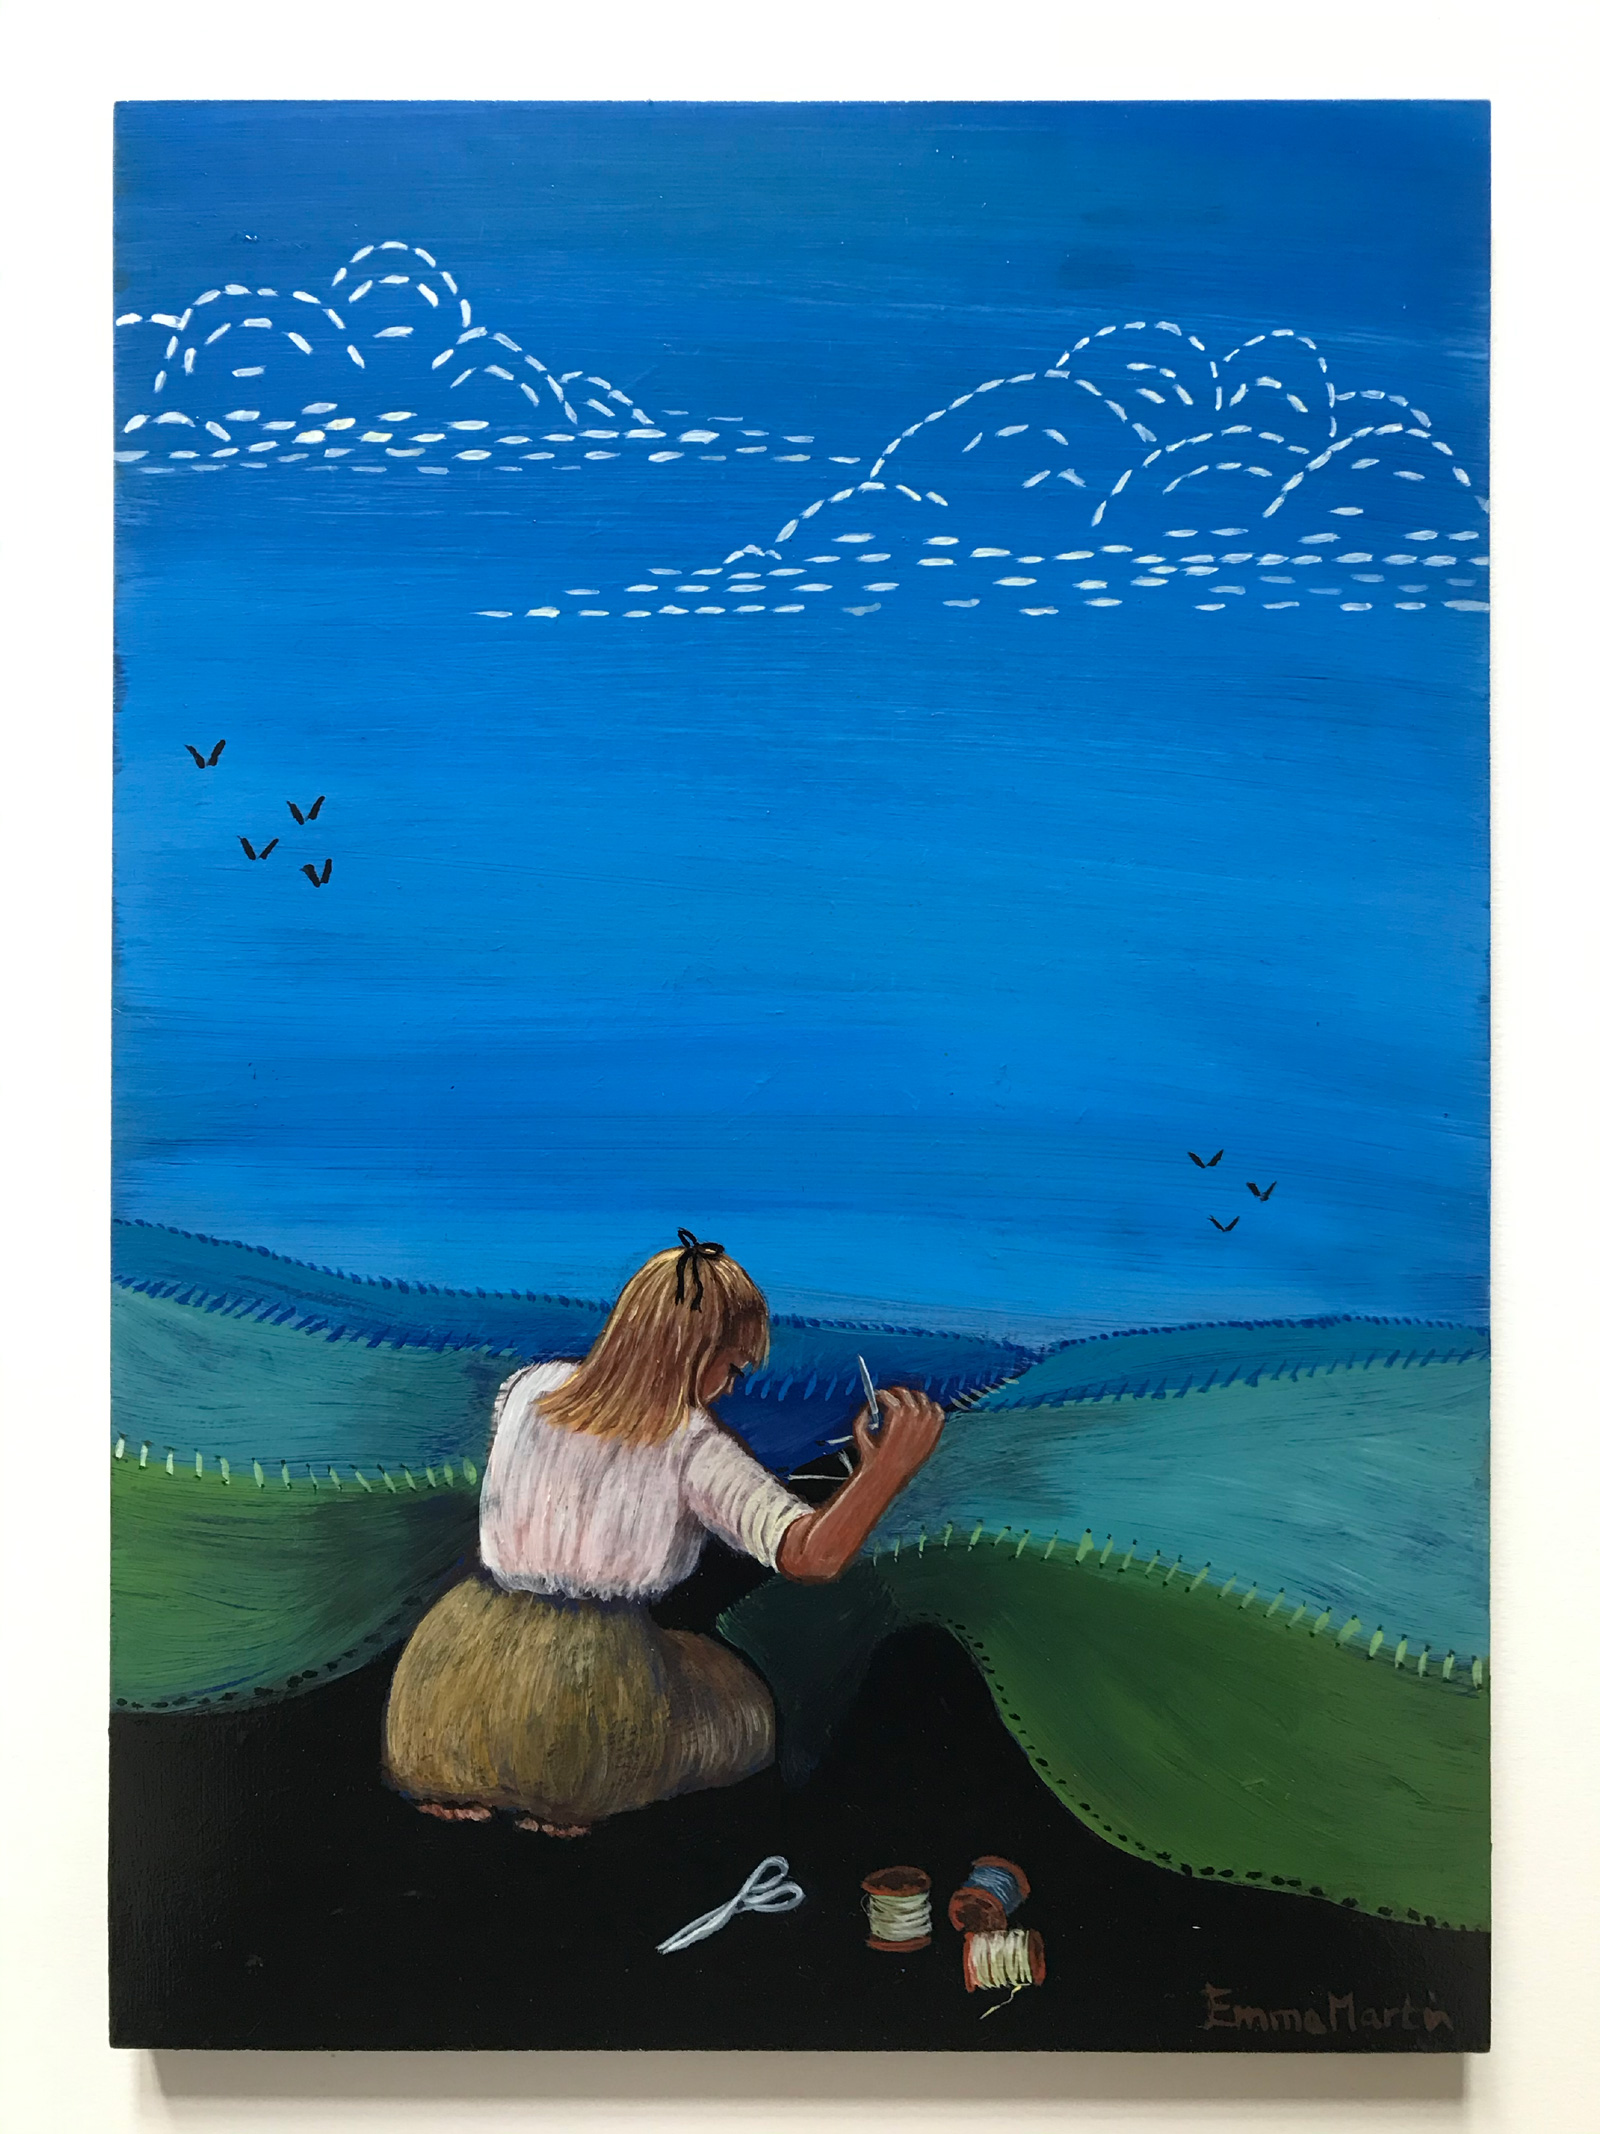 A young woman with blonde hair tied with a black bow, wearing a white blouse and a green skirt, kneels on a black pathway and threads together the green, hilly landscape ahead of her. She has three rolls of thread and a pair of scissors beside her. Above the low green hills, there is a large blue sky with two white threaded clouds. Beneath the left cloud there are four, distant blackbirds and beneath he right cloud and even more distant, there are three.